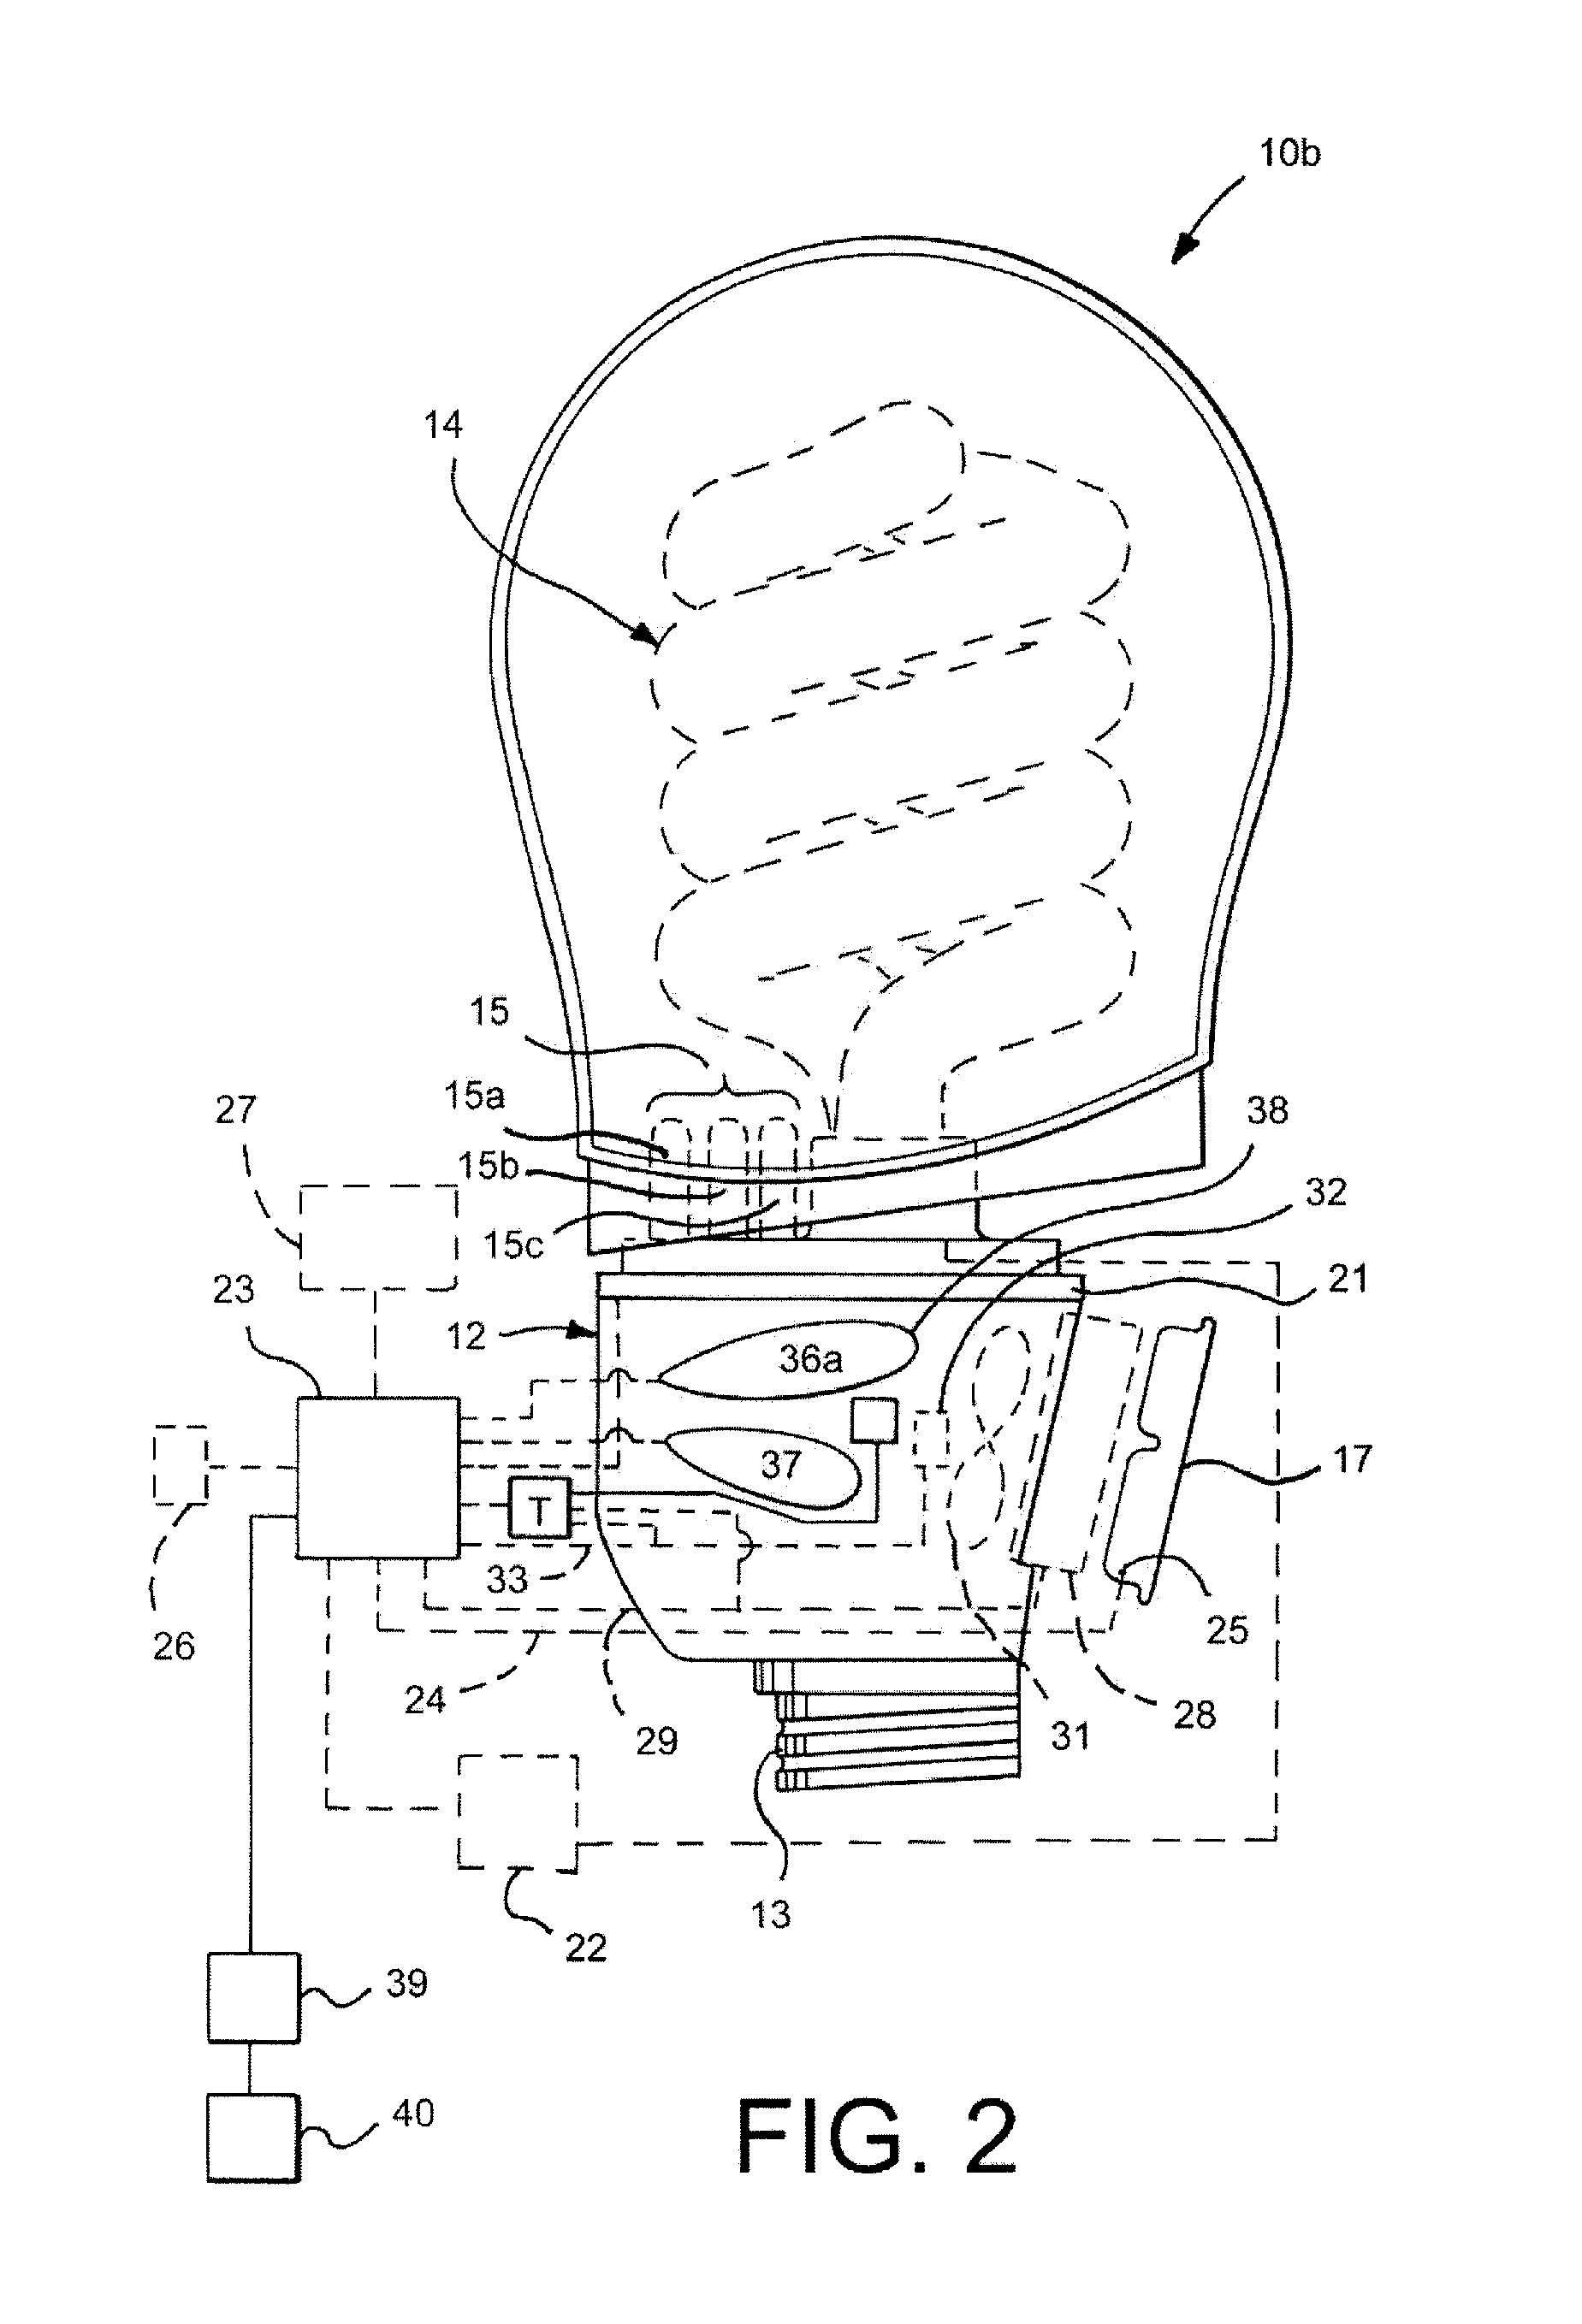 Combination light device with insect control ingredient emission